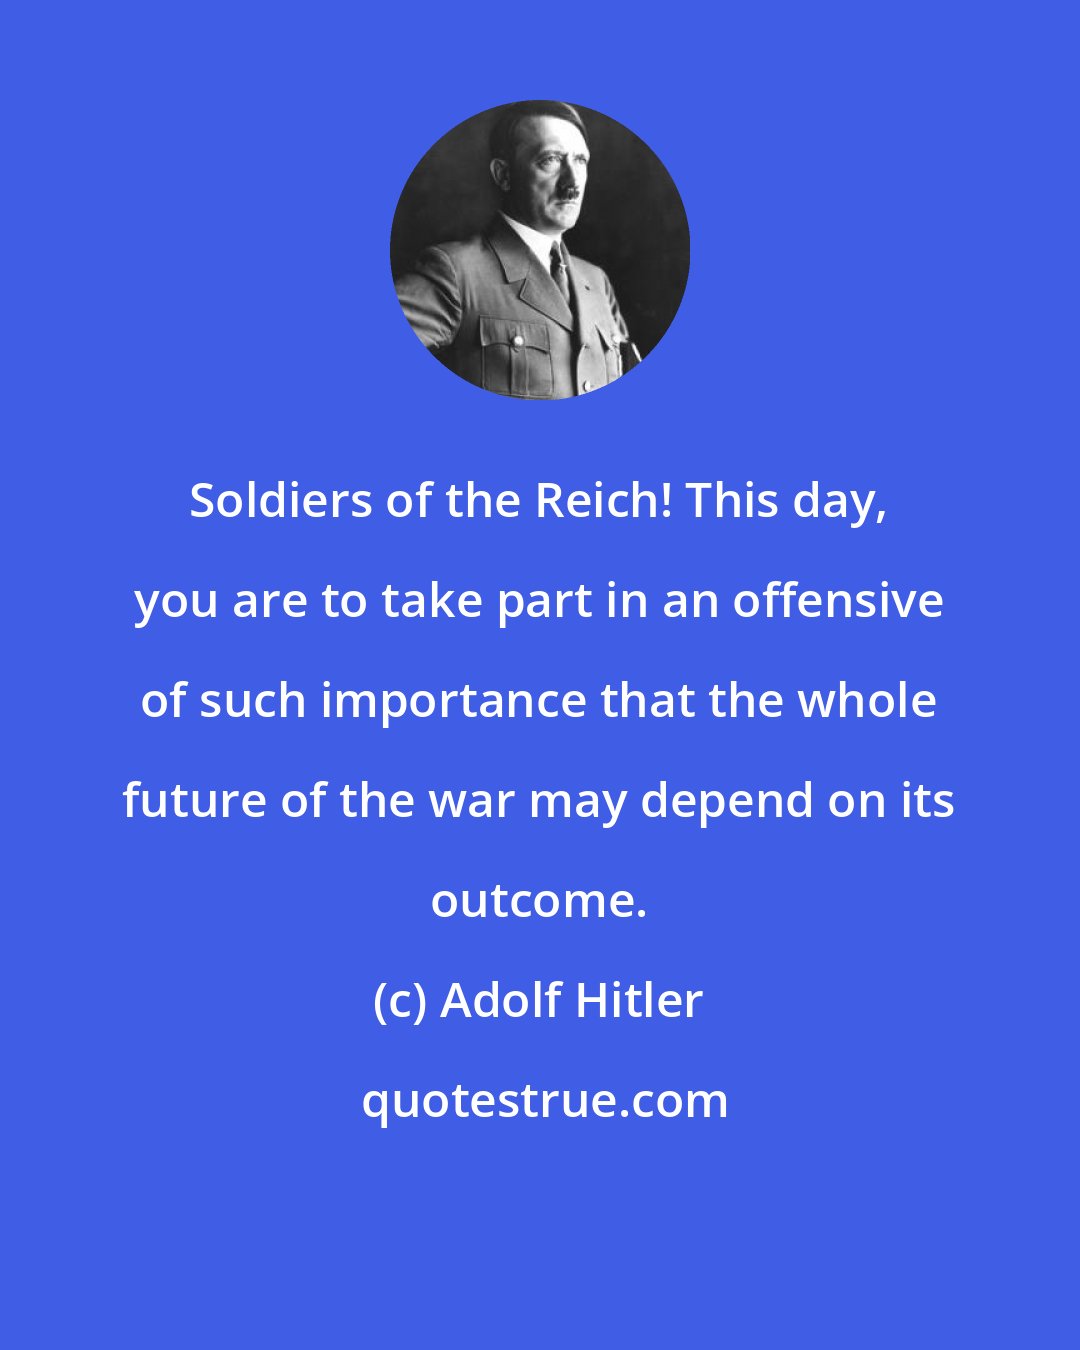 Adolf Hitler: Soldiers of the Reich! This day, you are to take part in an offensive of such importance that the whole future of the war may depend on its outcome.